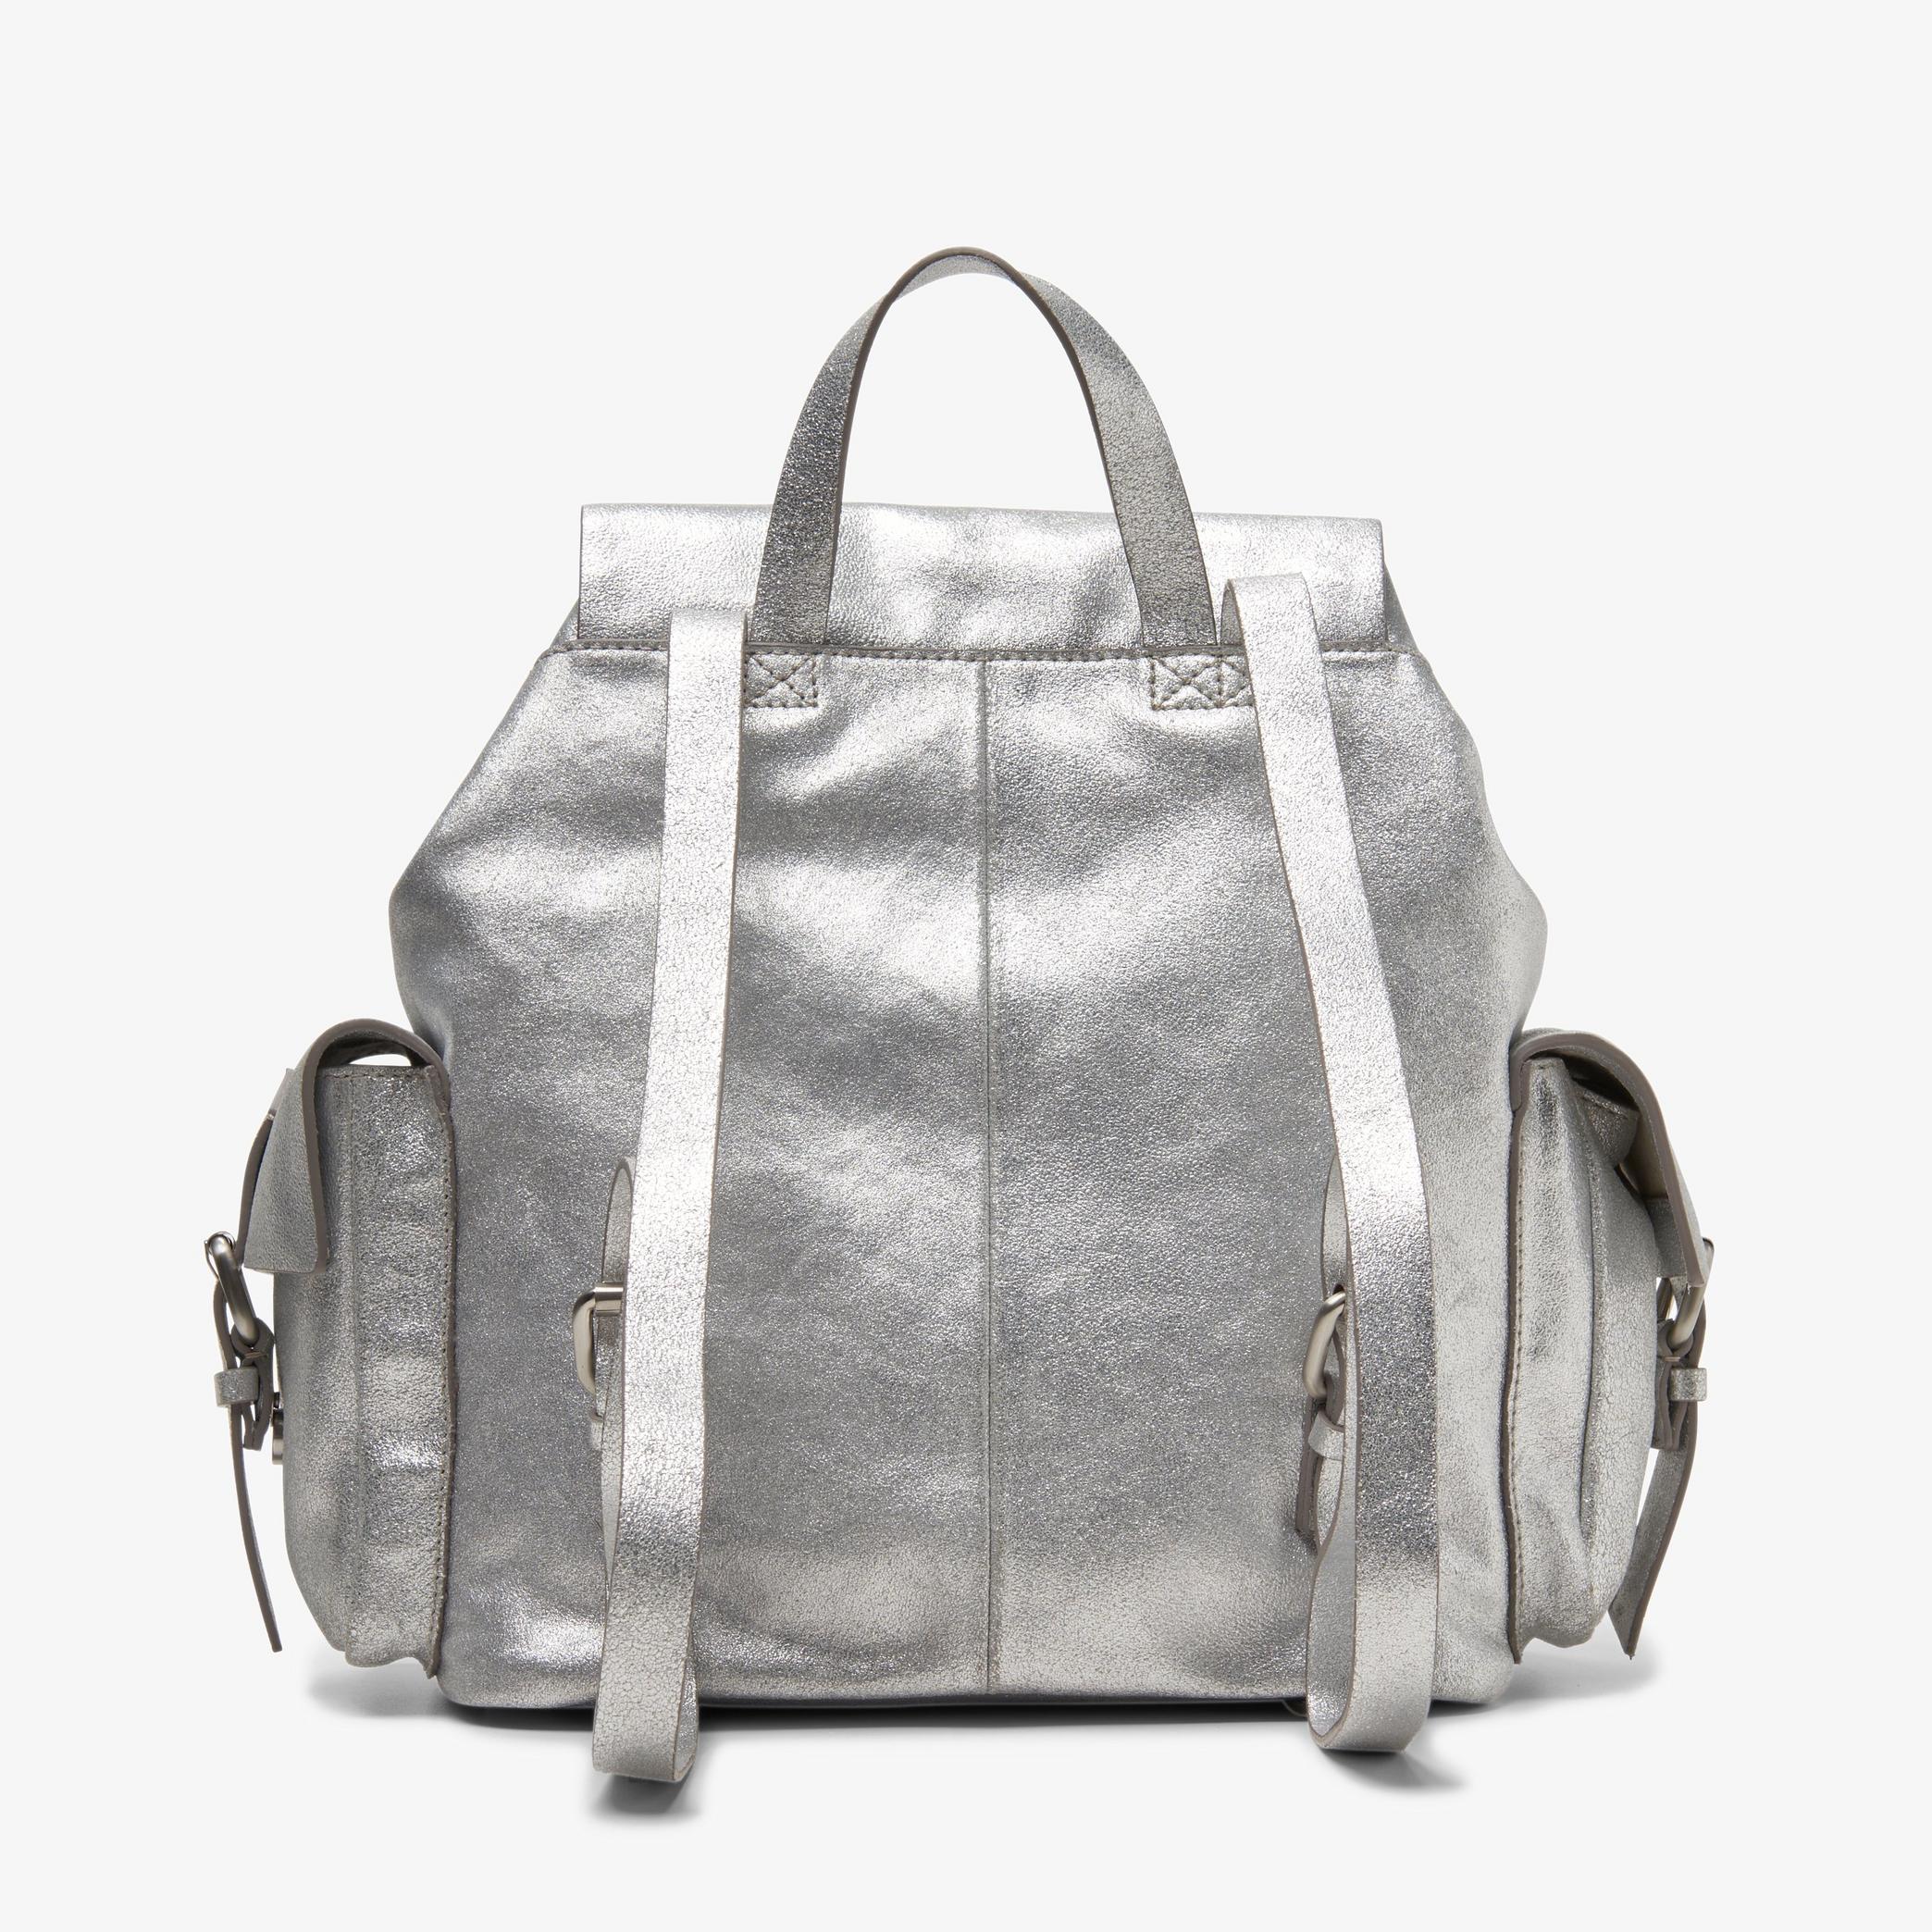 Raelyn Pack Silver Leather Backpack, view 2 of 4